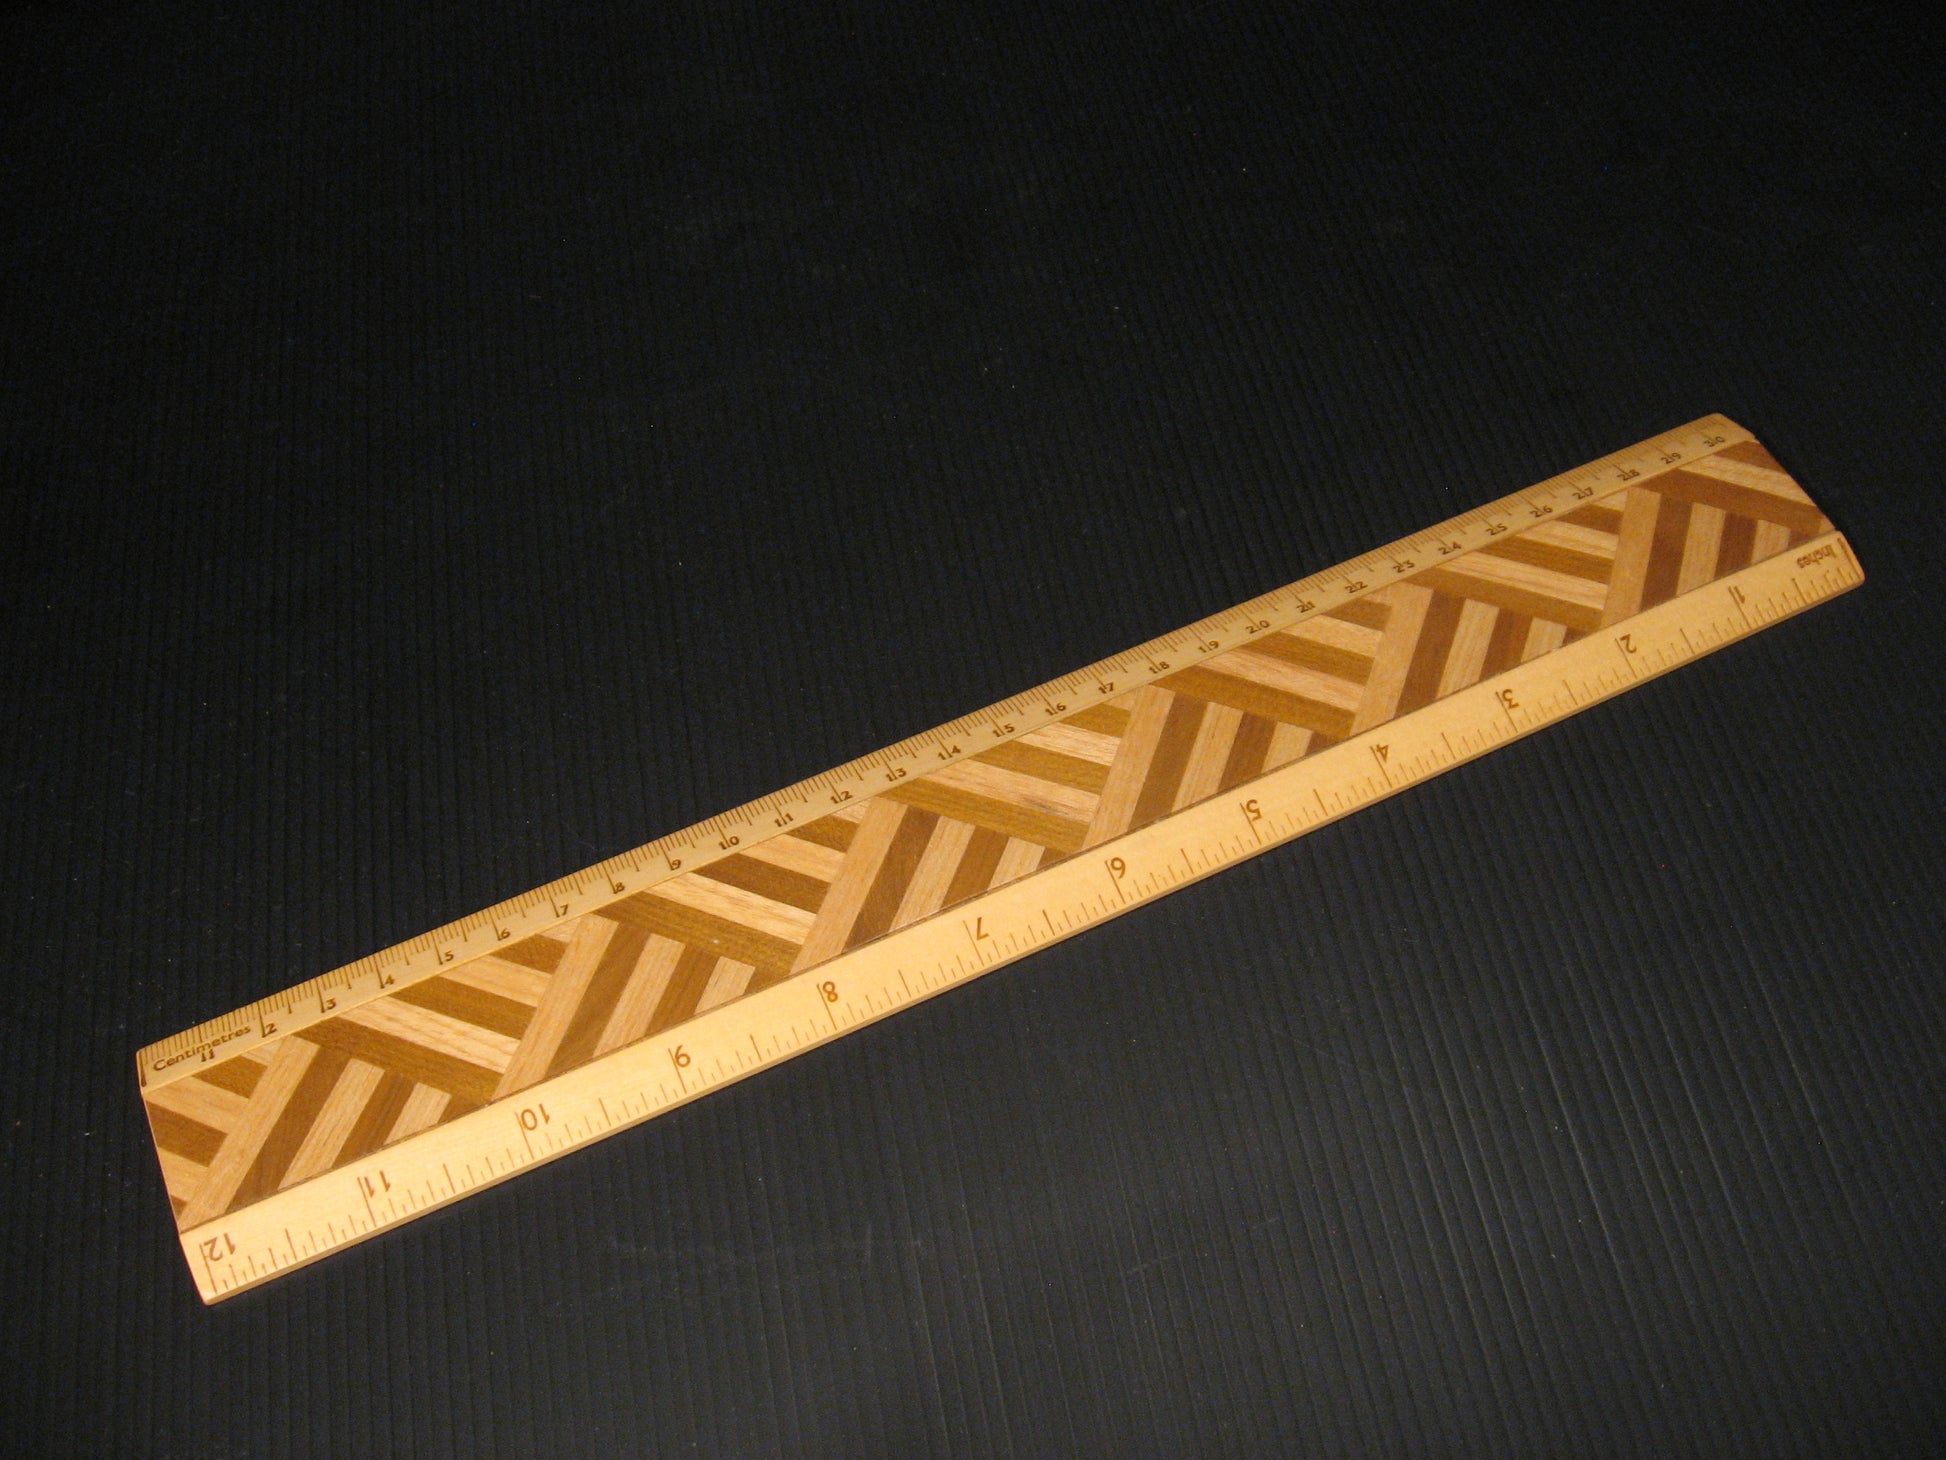 Ruler from NZ Native Timbers Pukatea and Tawa by Timber Arts Silver Fern Gallery